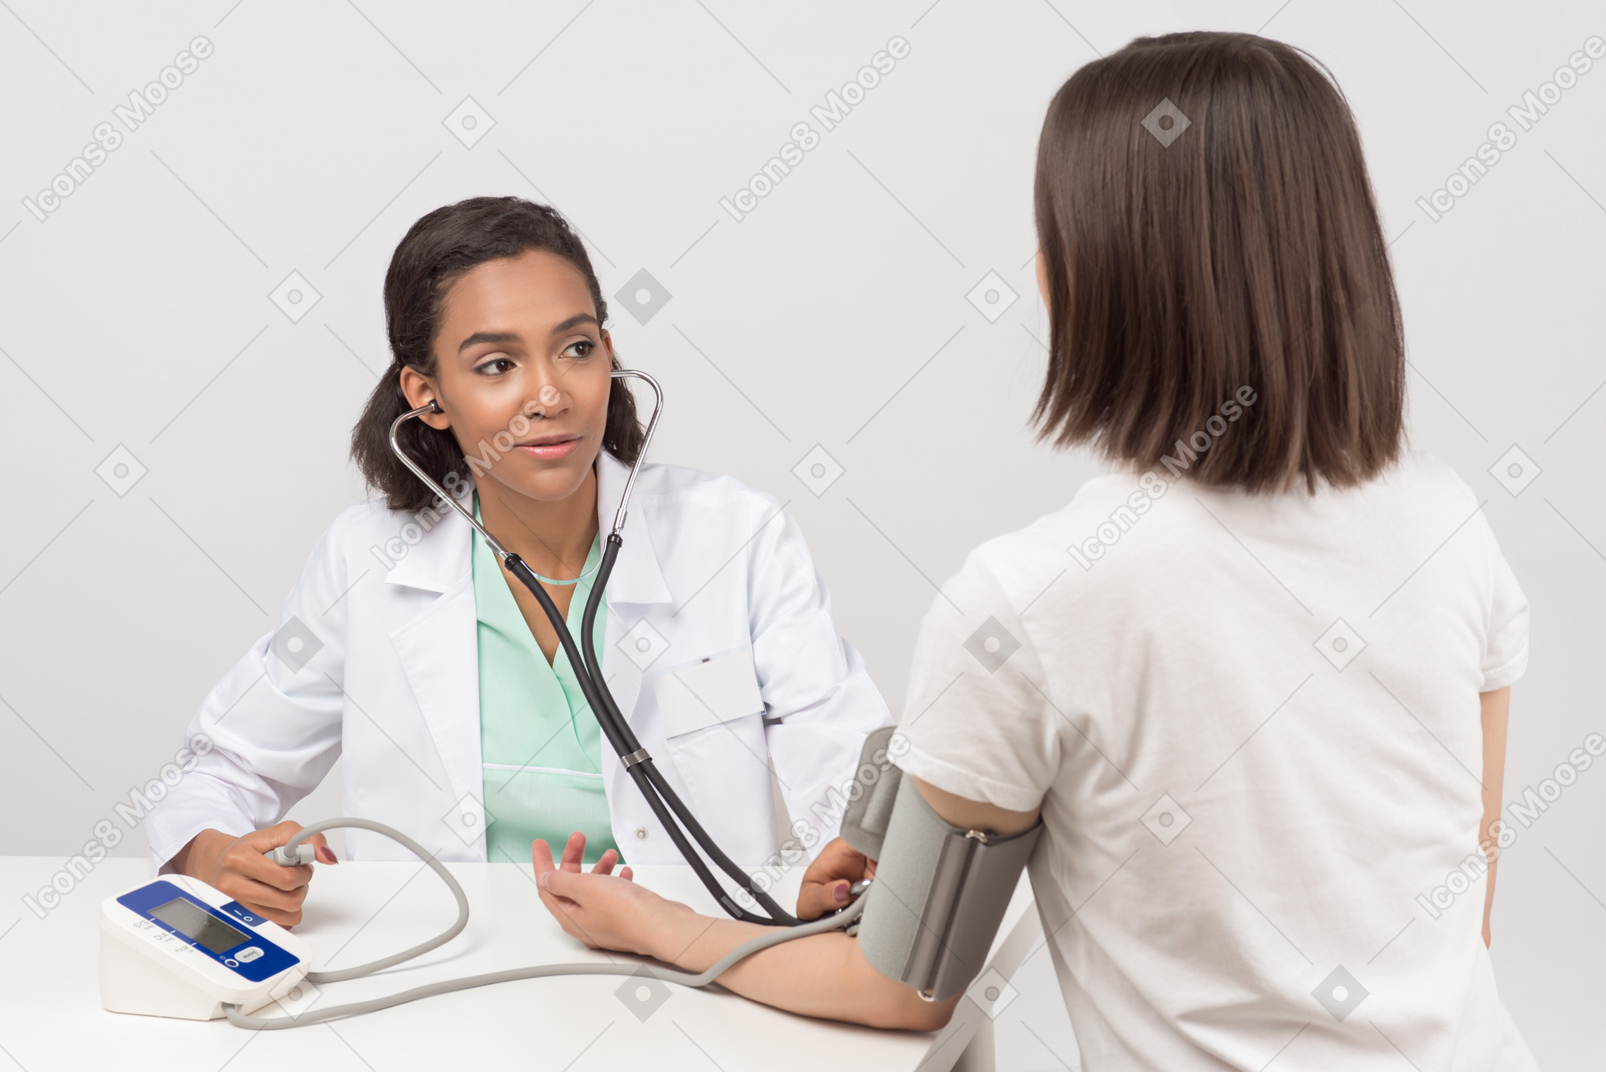 Doctor's interested how her patient's feeling